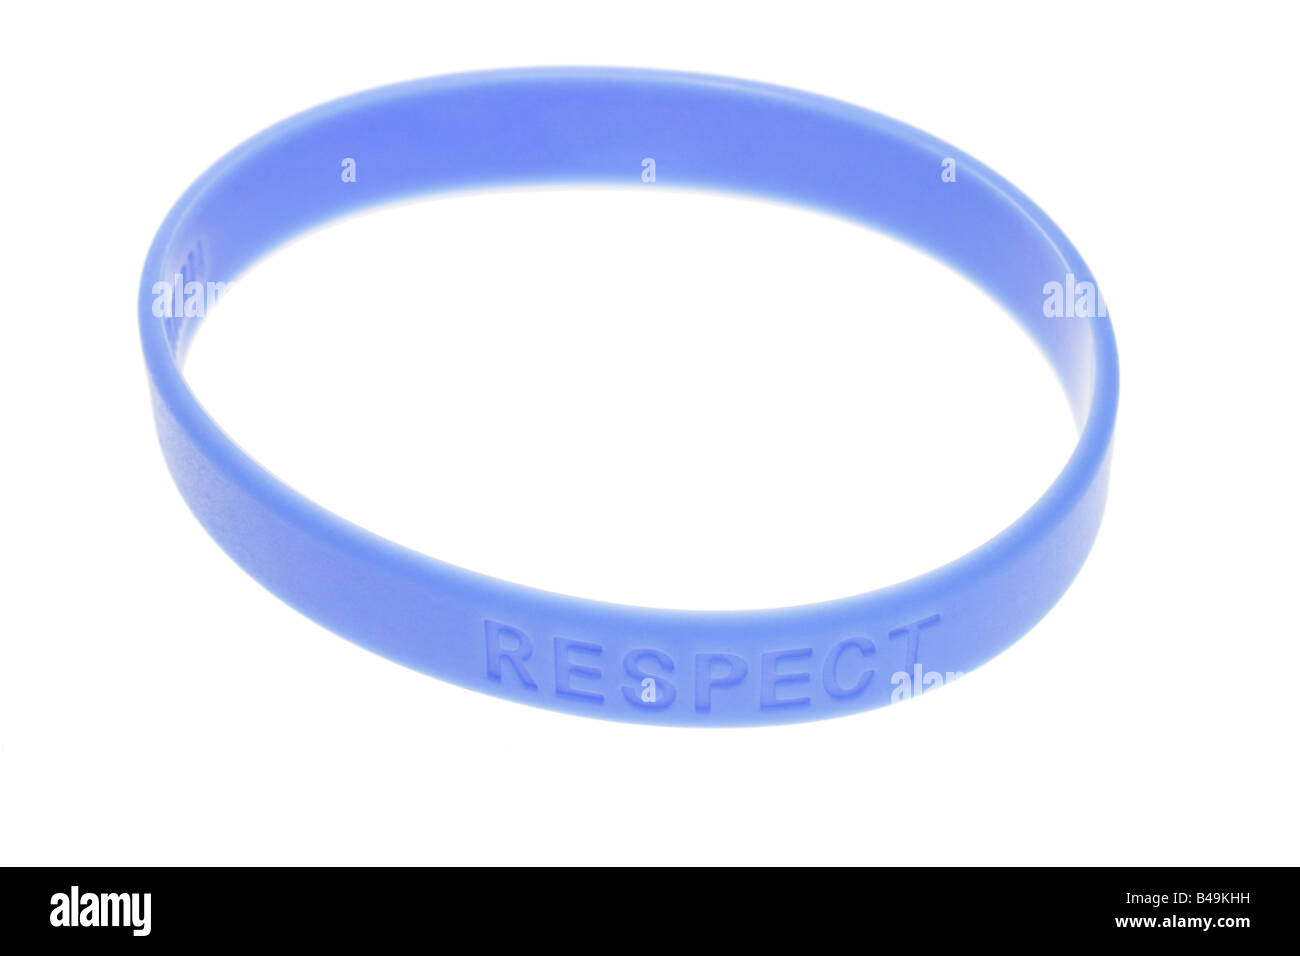 Word Respect on blue color wrist band Stock Photo